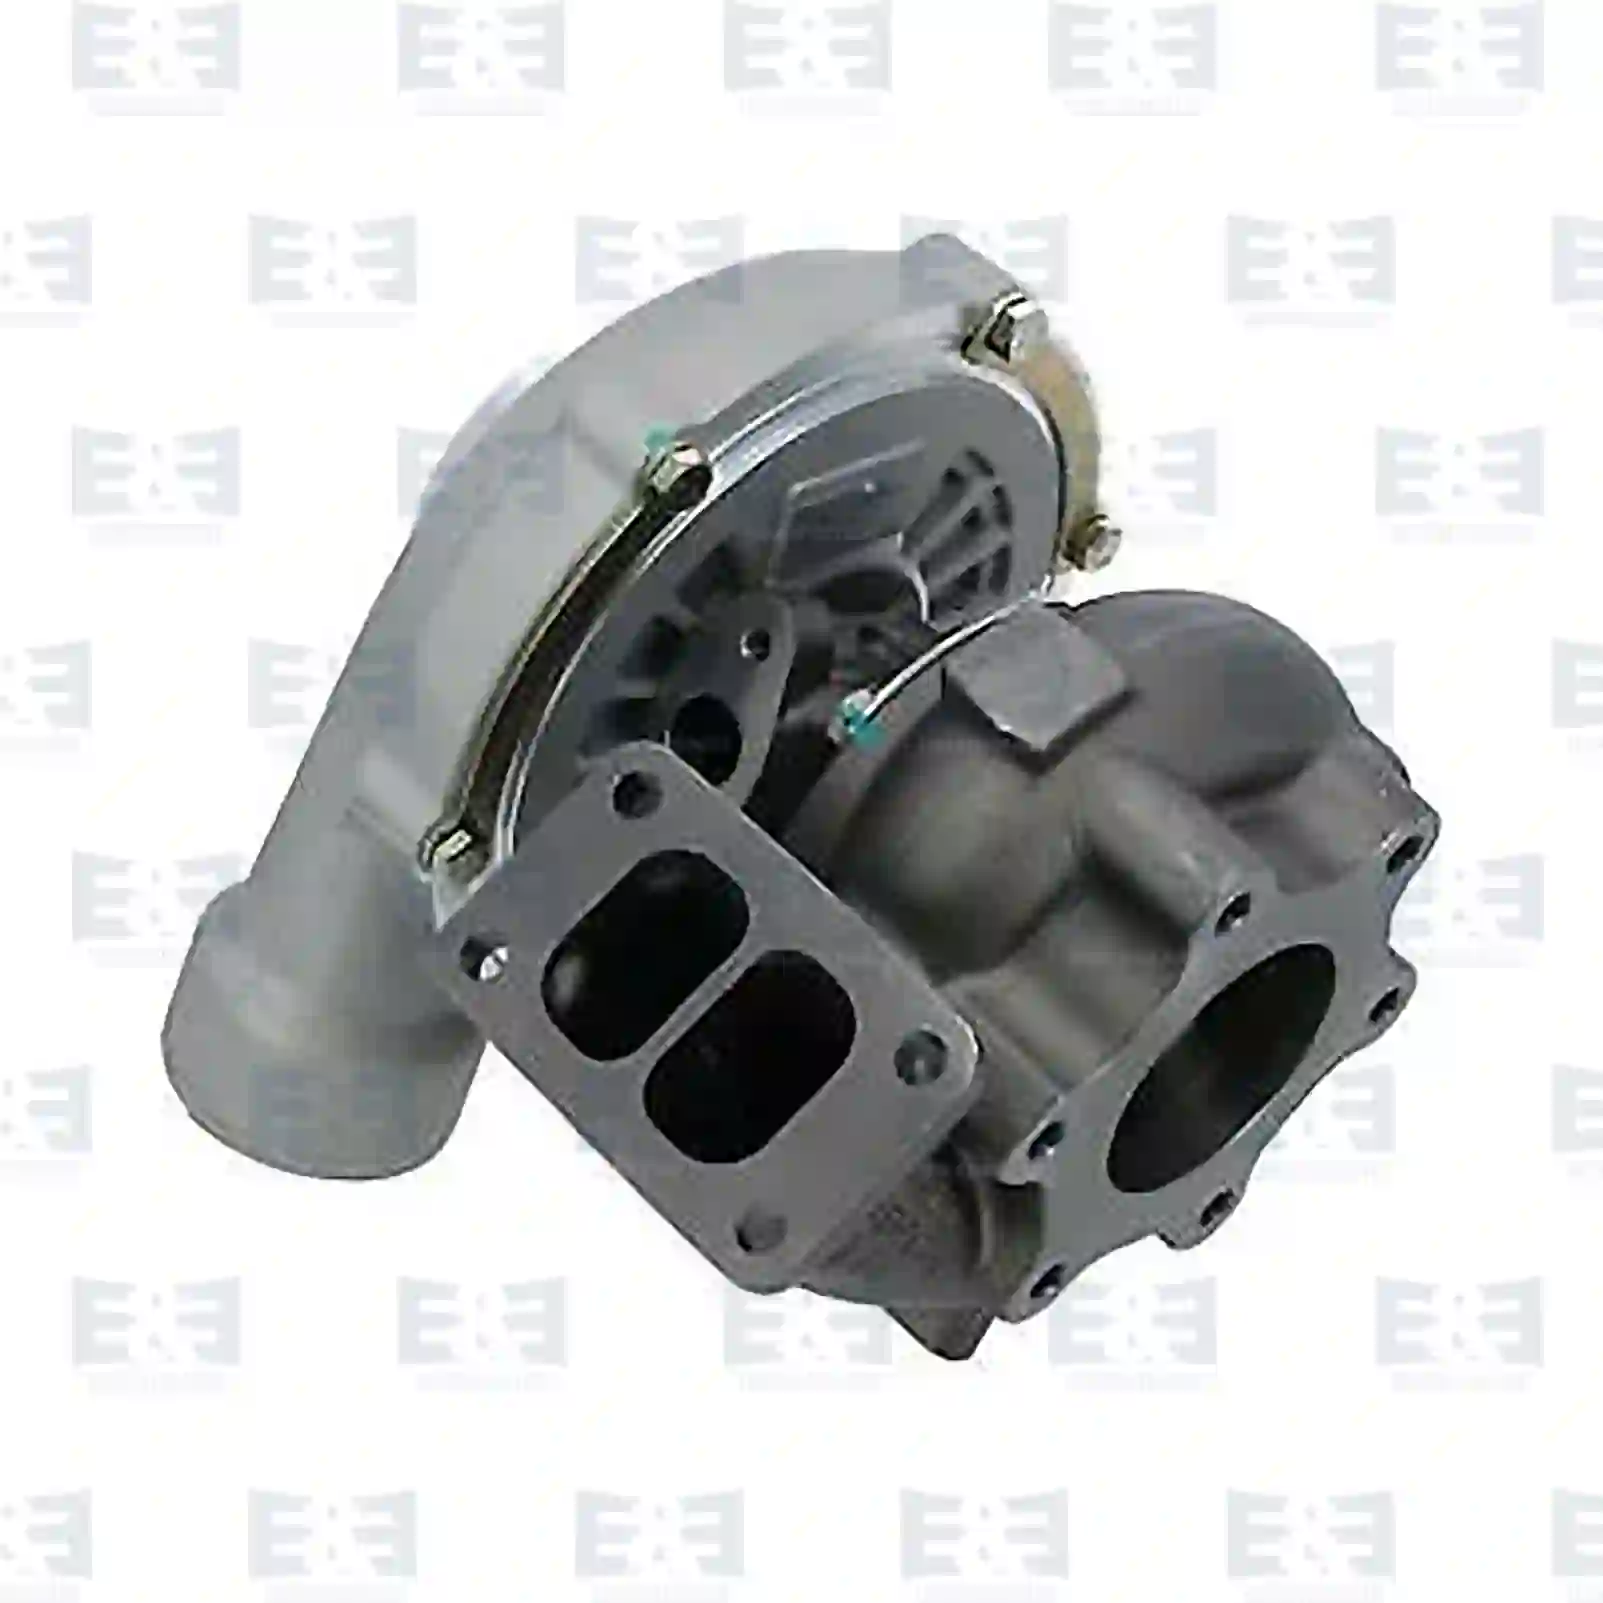 Turbocharger Turbocharger, with gasket kit, EE No 2E2200747 ,  oem no:0019906320, 0019906330, 0019906340, 0019906350, 0050967199, 0050967299, 0060963799, 006096379980, 0060963899, 006096389980, 0080961699, 008096169980, 0080961799, 008096179980, 0090961799, 0090961899, 009096189980, 0090964899, 0090964999, 0090968699, 0090968799, 0090968899, 0090968999, ZG02215-0008 E&E Truck Spare Parts | Truck Spare Parts, Auotomotive Spare Parts